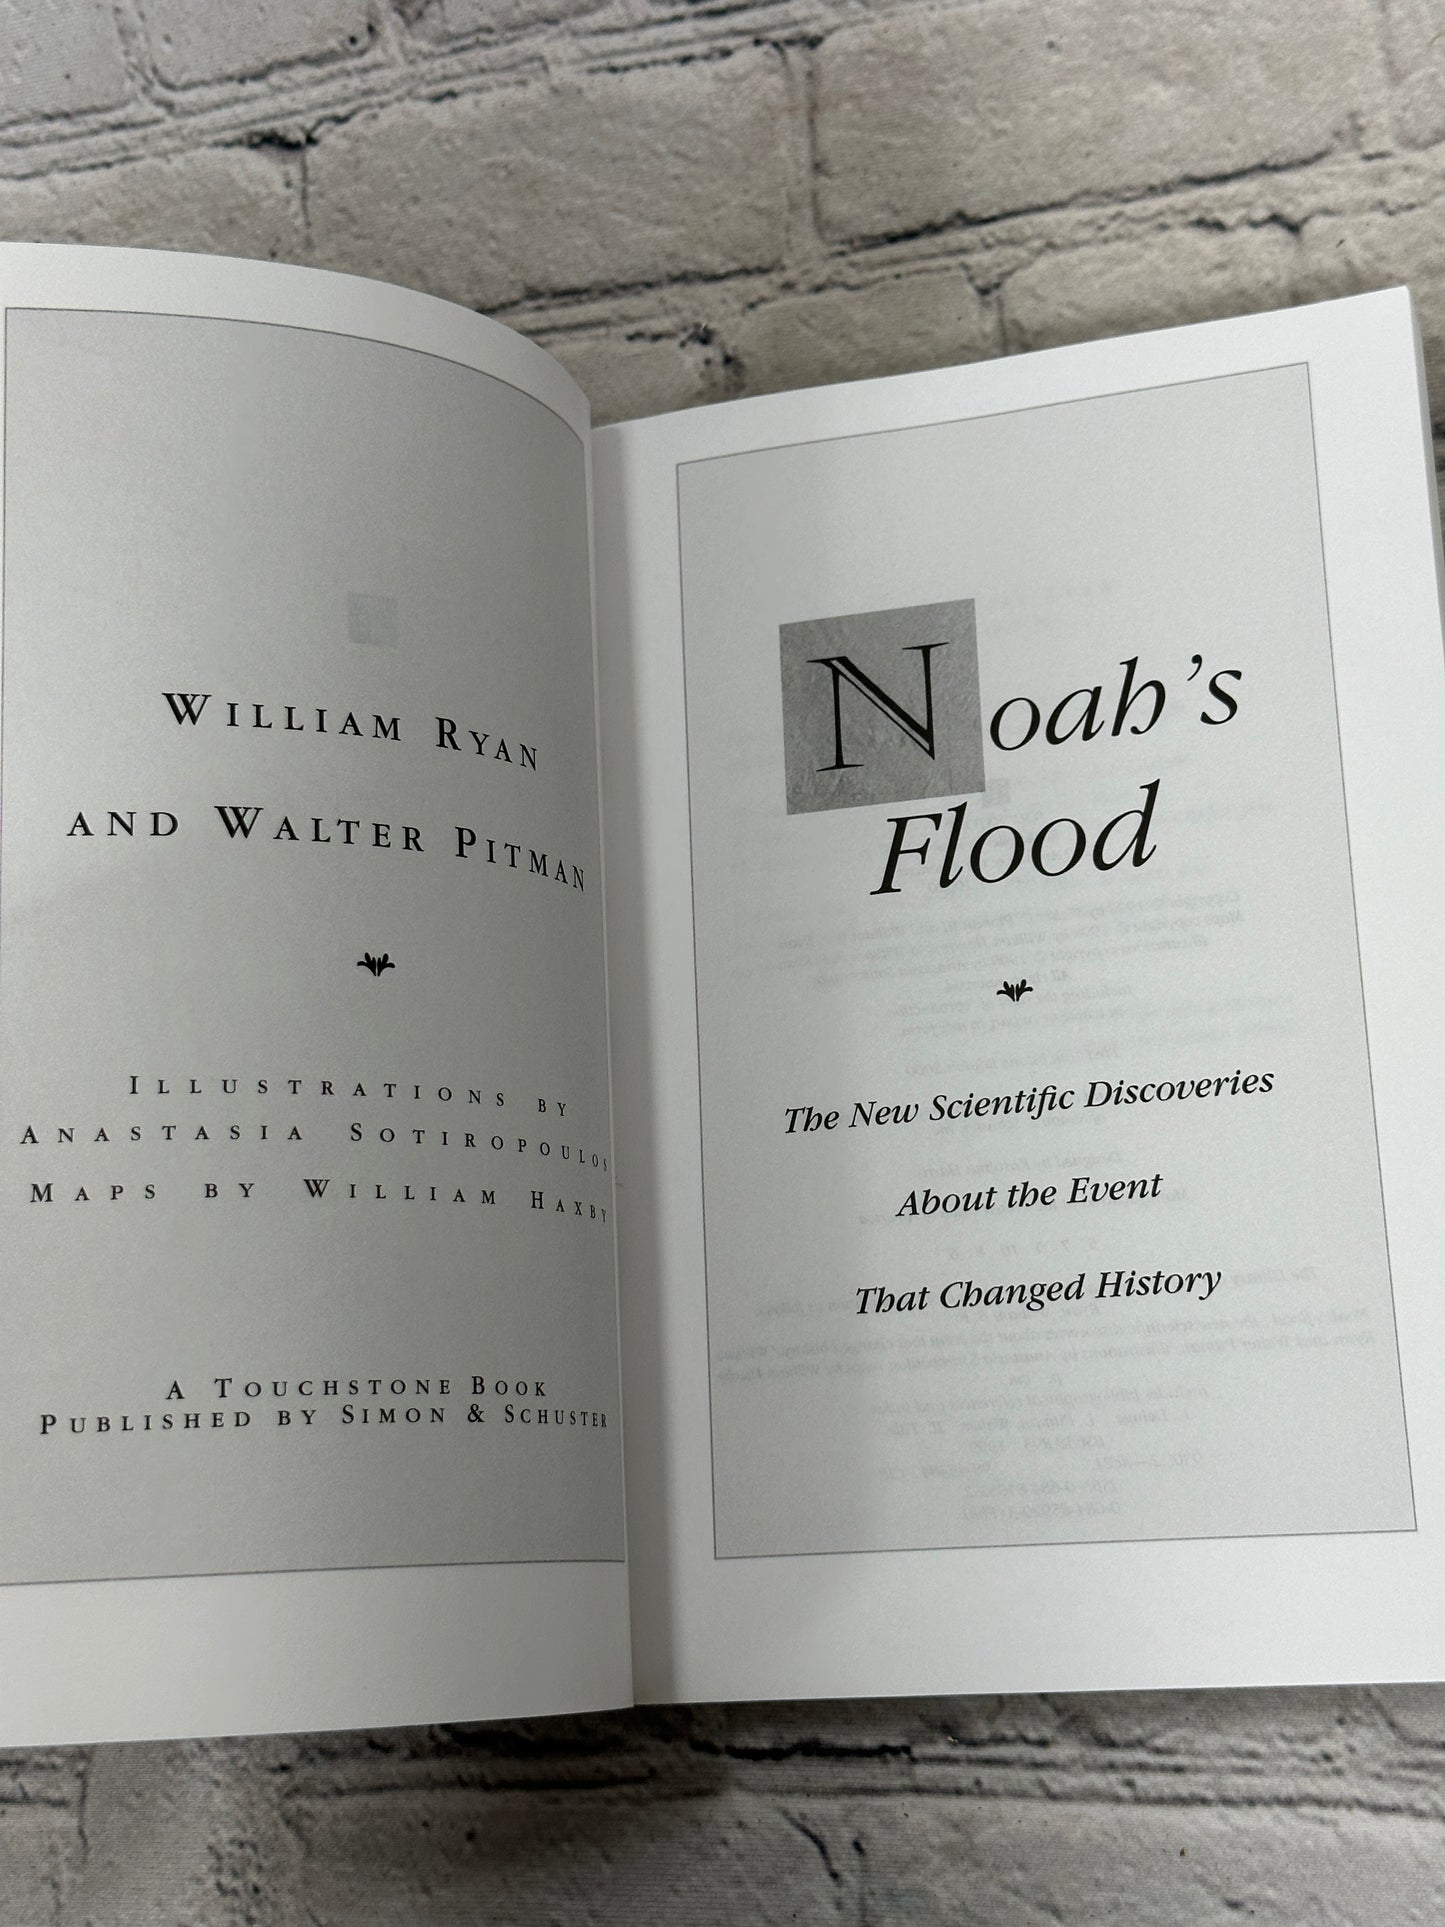 Noah's Flood: The New Scientific Discoveries About..by Ryan and Pitman [2000]